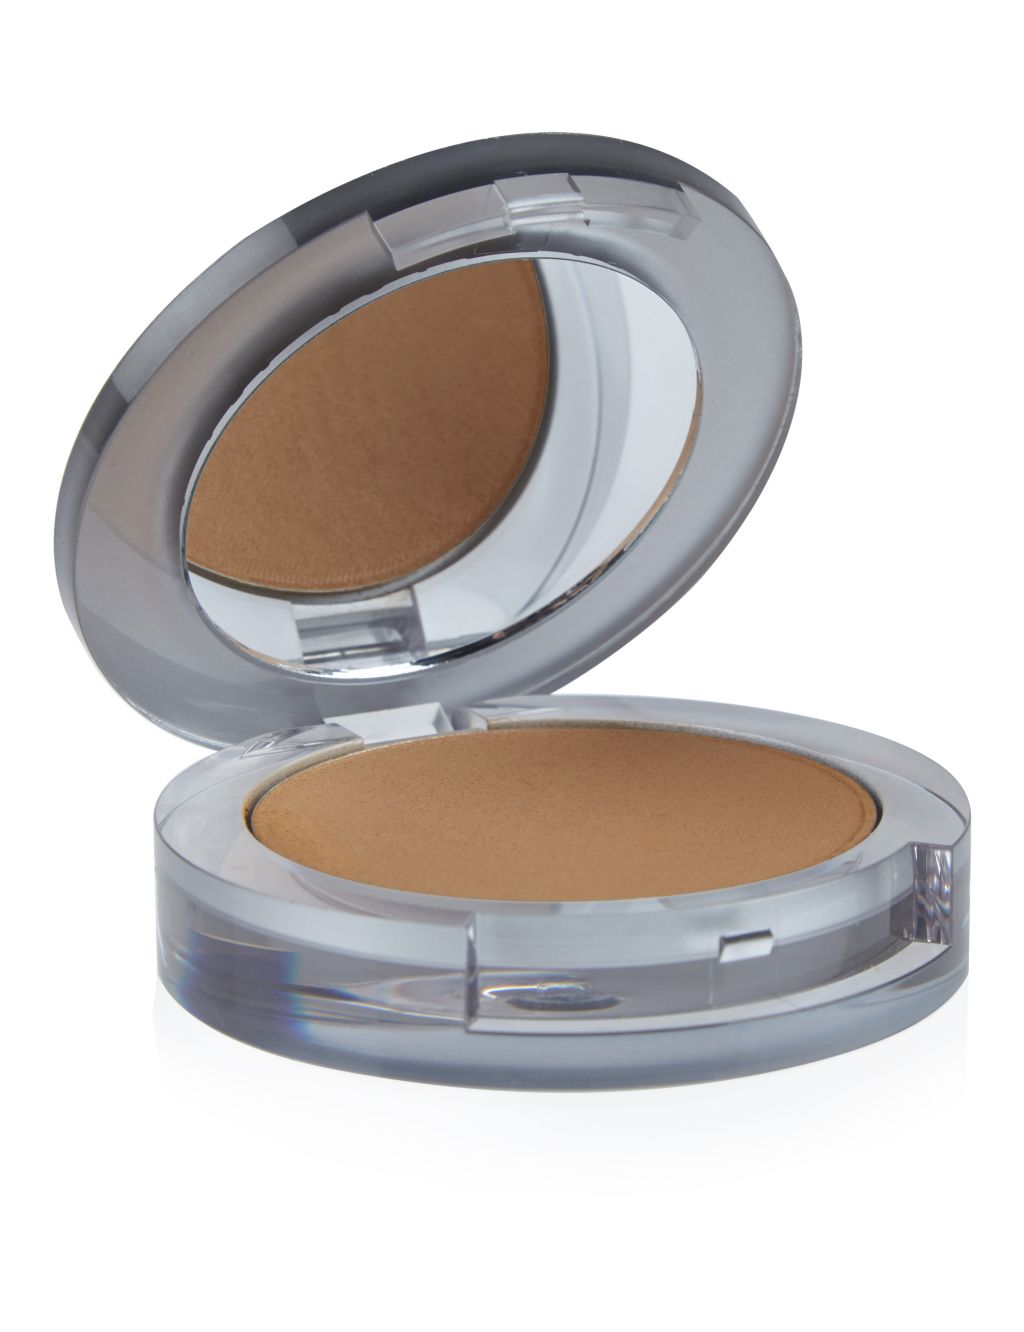 4-in-1 Pressed Mineral Make Up Compact 8g | PUR | M&S